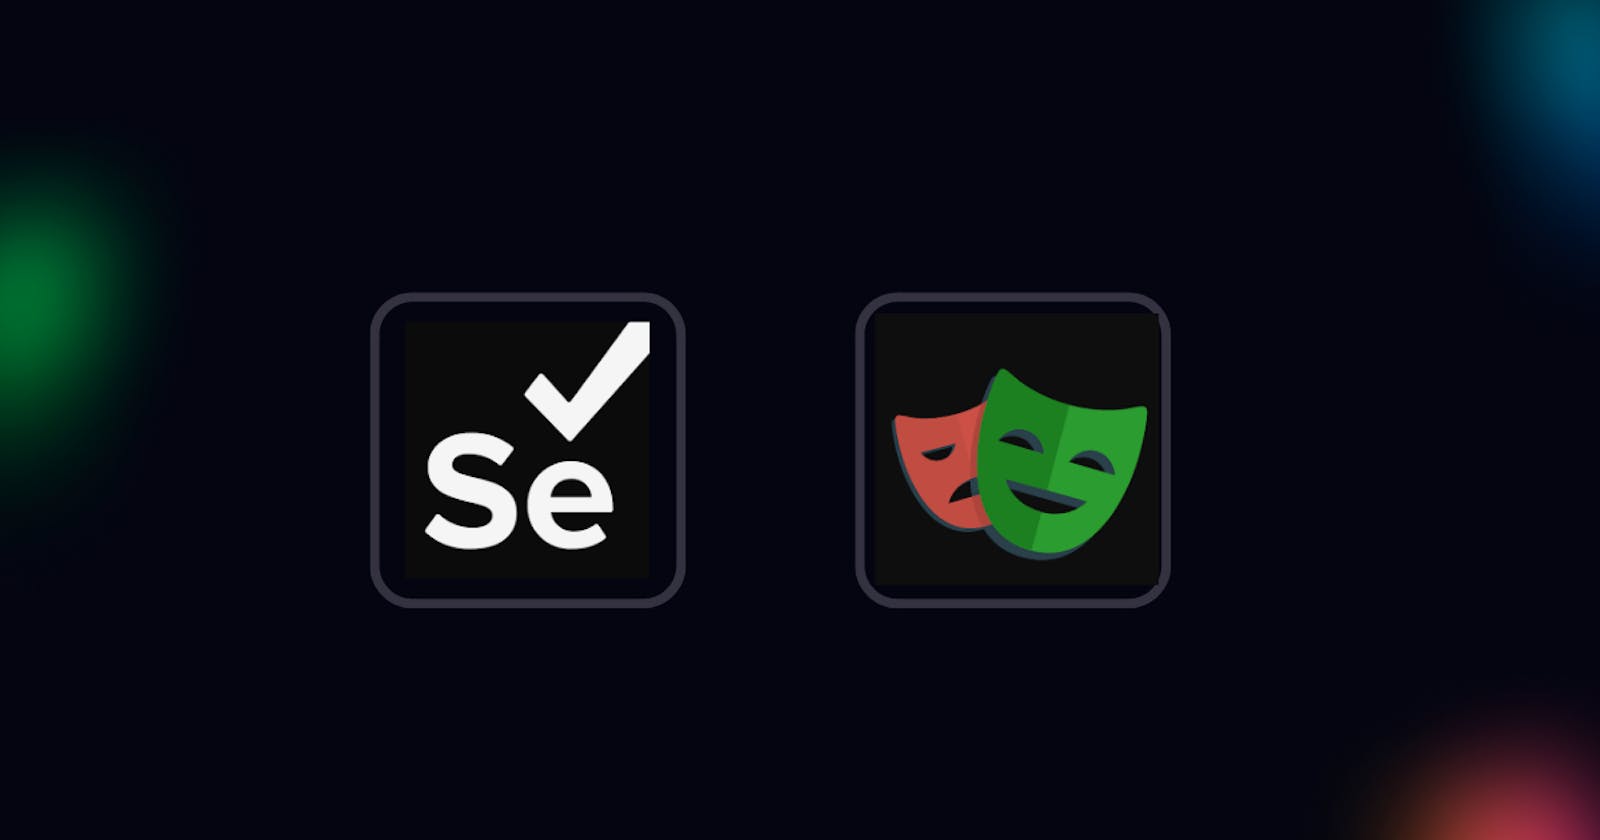 Playwright vs. Selenium: which one to use for web scraping?